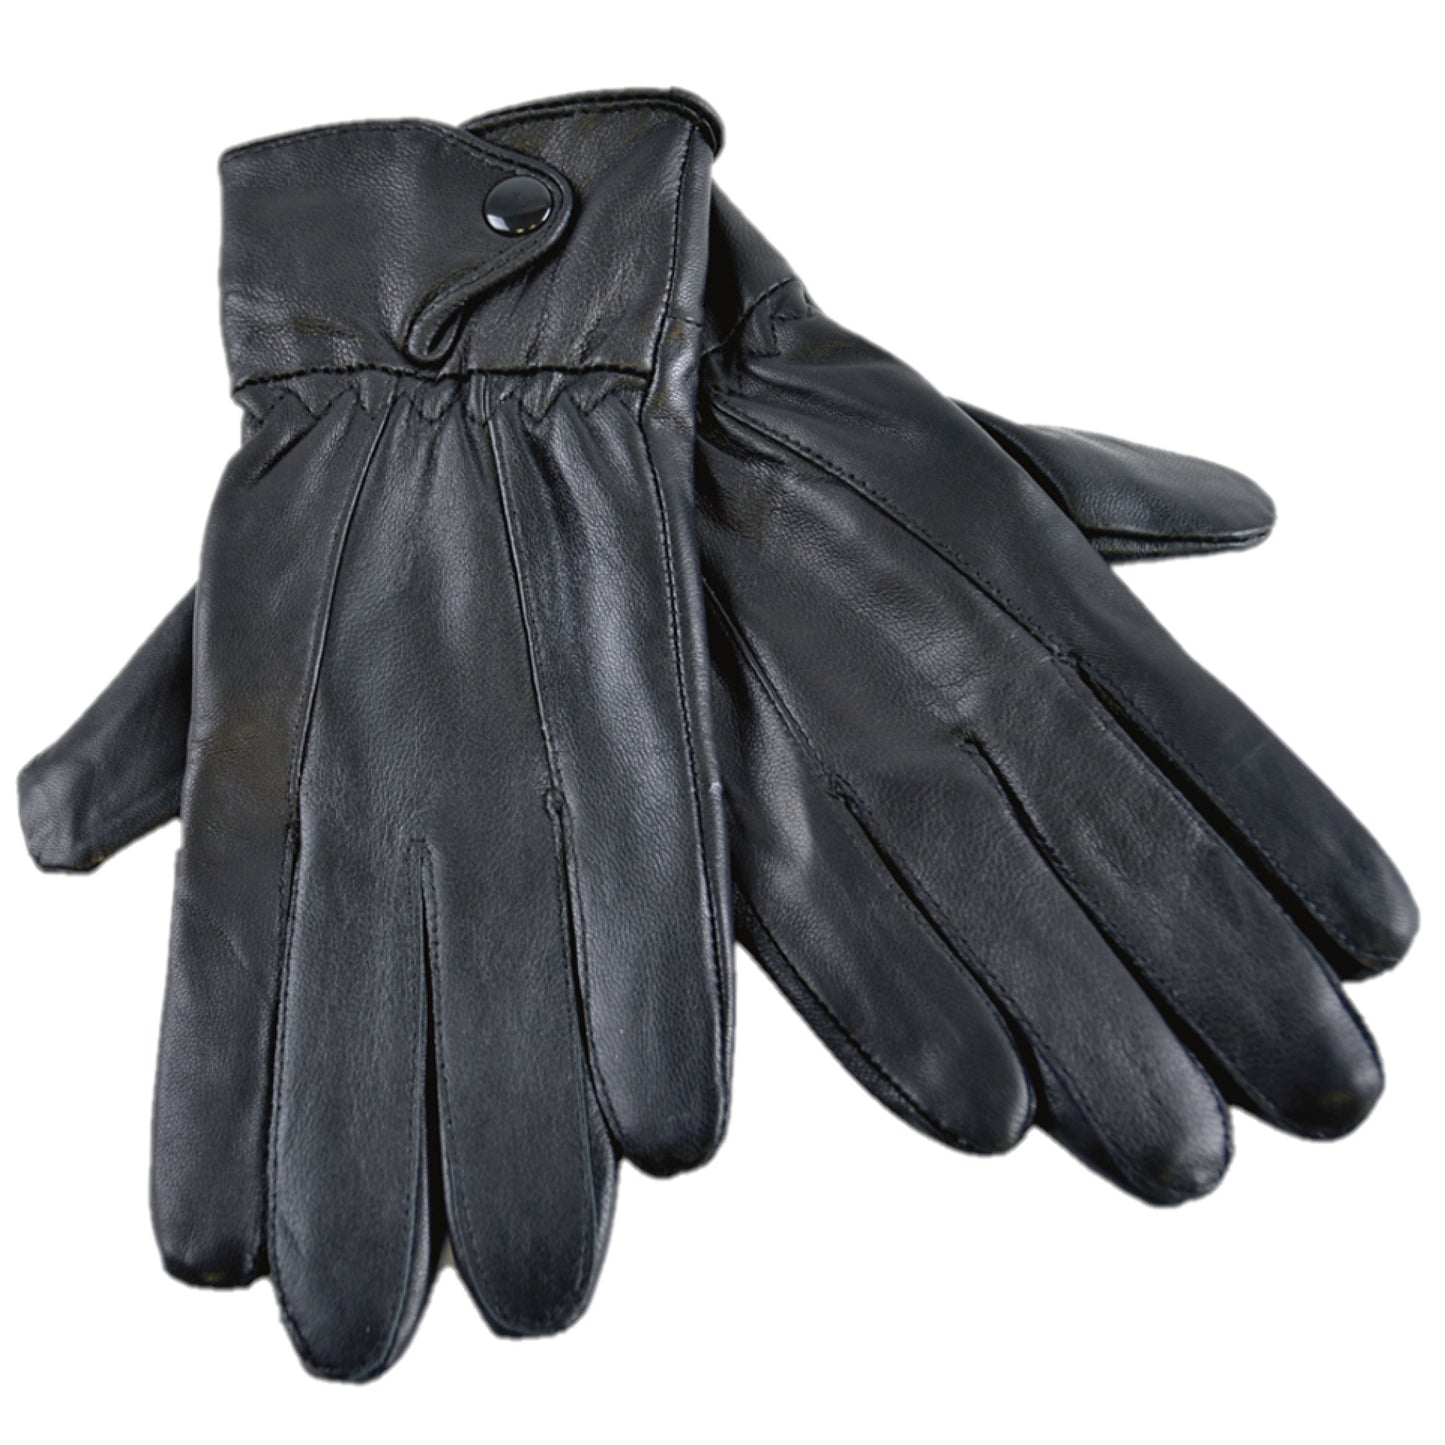 Ladies Black Leather Gloves Women's Soft Warm Lined Winter